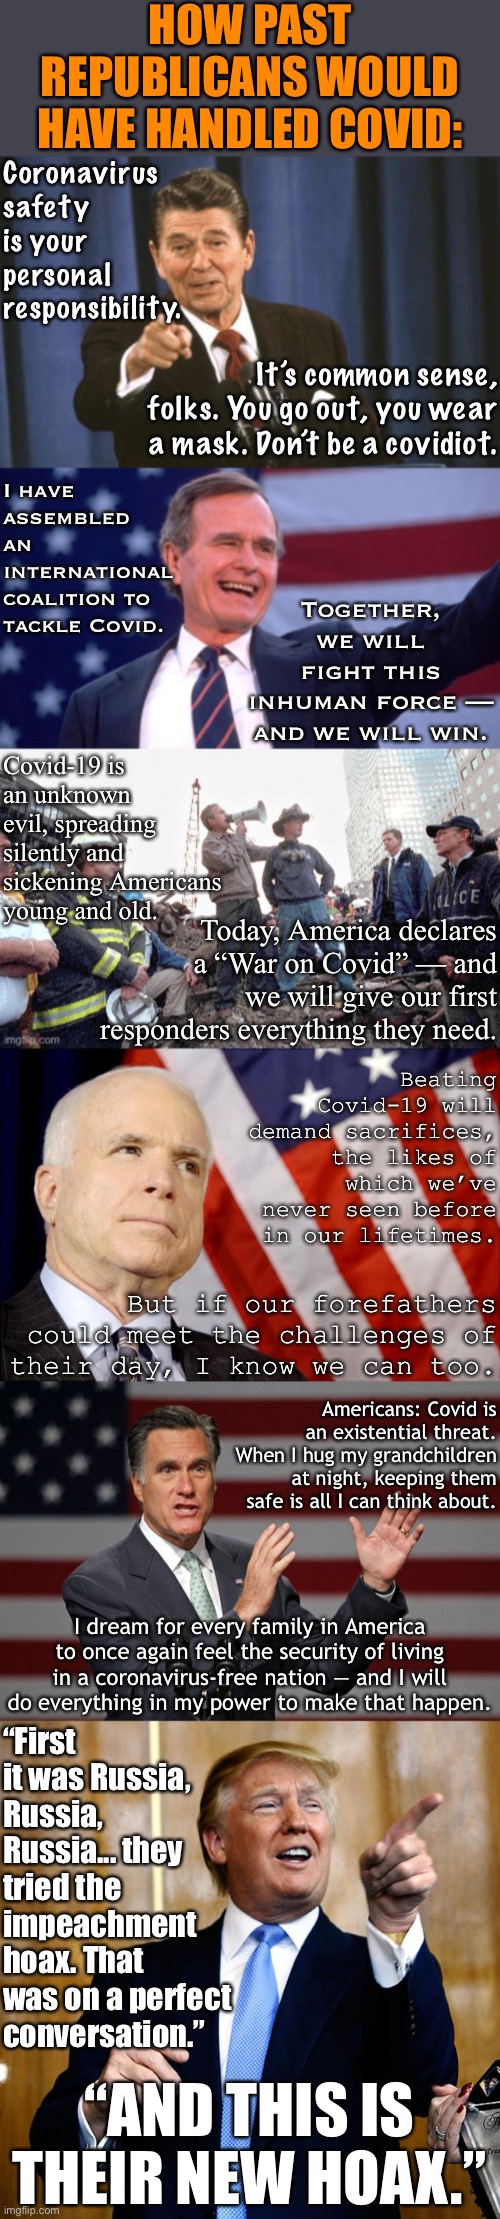 Watch closely now as I praise more Republicans in a single meme than you will ever see from a Trump cultist | HOW PAST REPUBLICANS WOULD HAVE HANDLED COVID:; Coronavirus safety is your personal responsibility. It’s common sense, folks. You go out, you wear a mask. Don’t be a covidiot. I have assembled an international coalition to tackle Covid. Together, we will fight this inhuman force — and we will win. Covid-19 is an unknown evil, spreading silently and sickening Americans young and old. Today, America declares a “War on Covid” — and we will give our first responders everything they need. Beating Covid-19 will demand sacrifices, the likes of which we’ve never seen before in our lifetimes. But if our forefathers could meet the challenges of their day, I know we can too. Americans: Covid is an existential threat. When I hug my grandchildren at night, keeping them safe is all I can think about. I dream for every family in America to once again feel the security of living in a coronavirus-free nation — and I will do everything in my power to make that happen. “First it was Russia, Russia, Russia... they tried the impeachment hoax. That was on a perfect conversation.”; “AND THIS IS THEIR NEW HOAX.” | image tagged in mitt romney,john mccain,republicans,covid-19,donald trump is an idiot,george bush | made w/ Imgflip meme maker